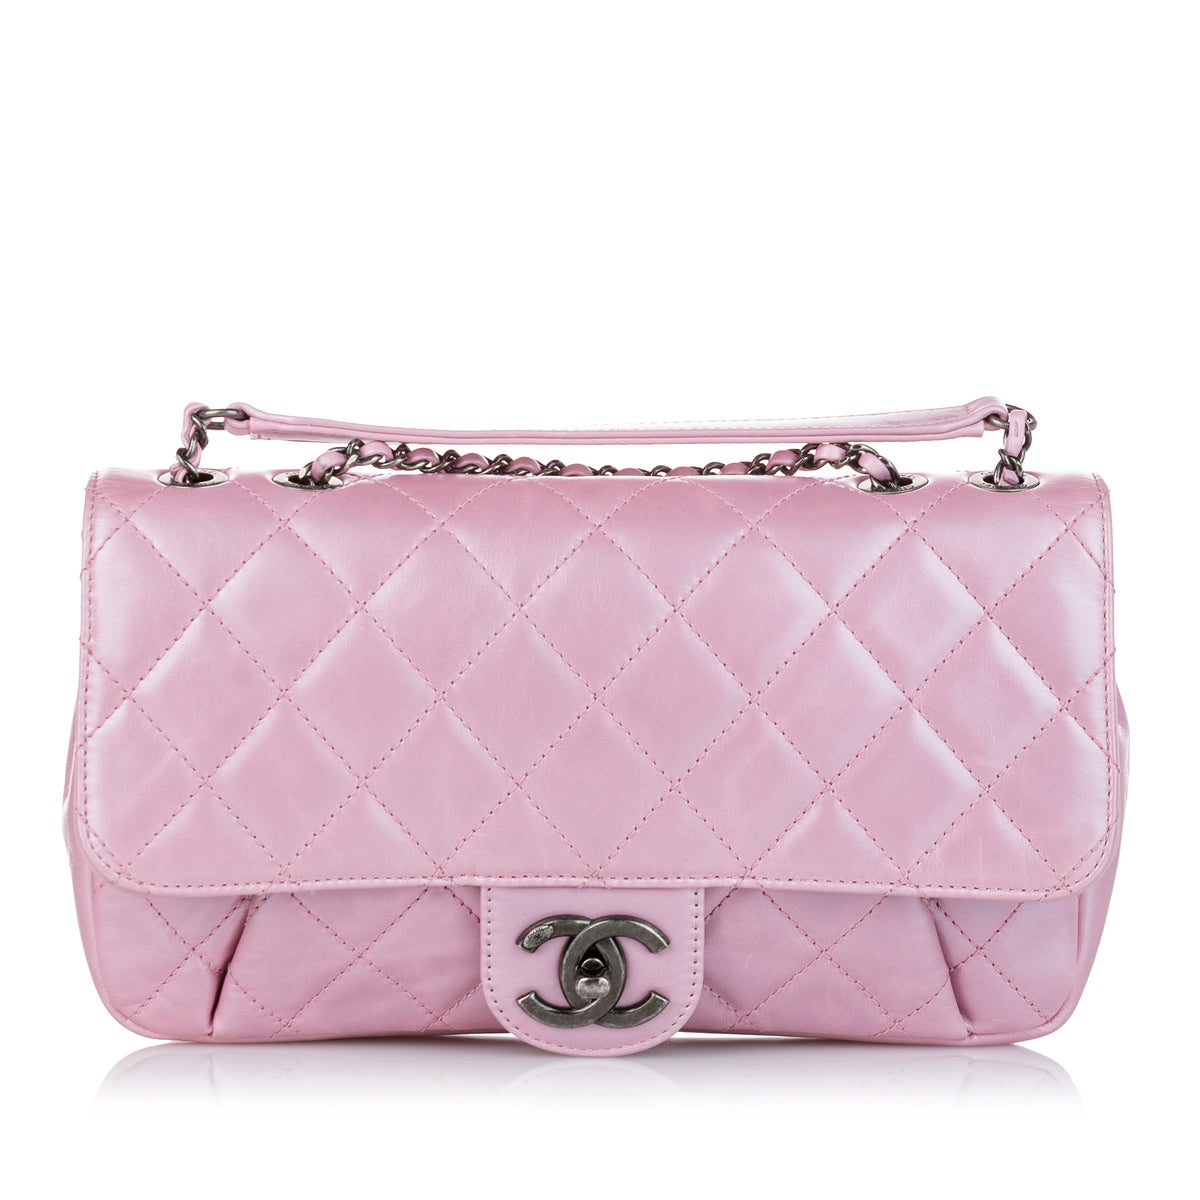 Preloved CHANEL Timeless Pink Quilted Lambskin Medium Single Flap Chain  Shoulder Bag 22203053 071423 $500 OFF